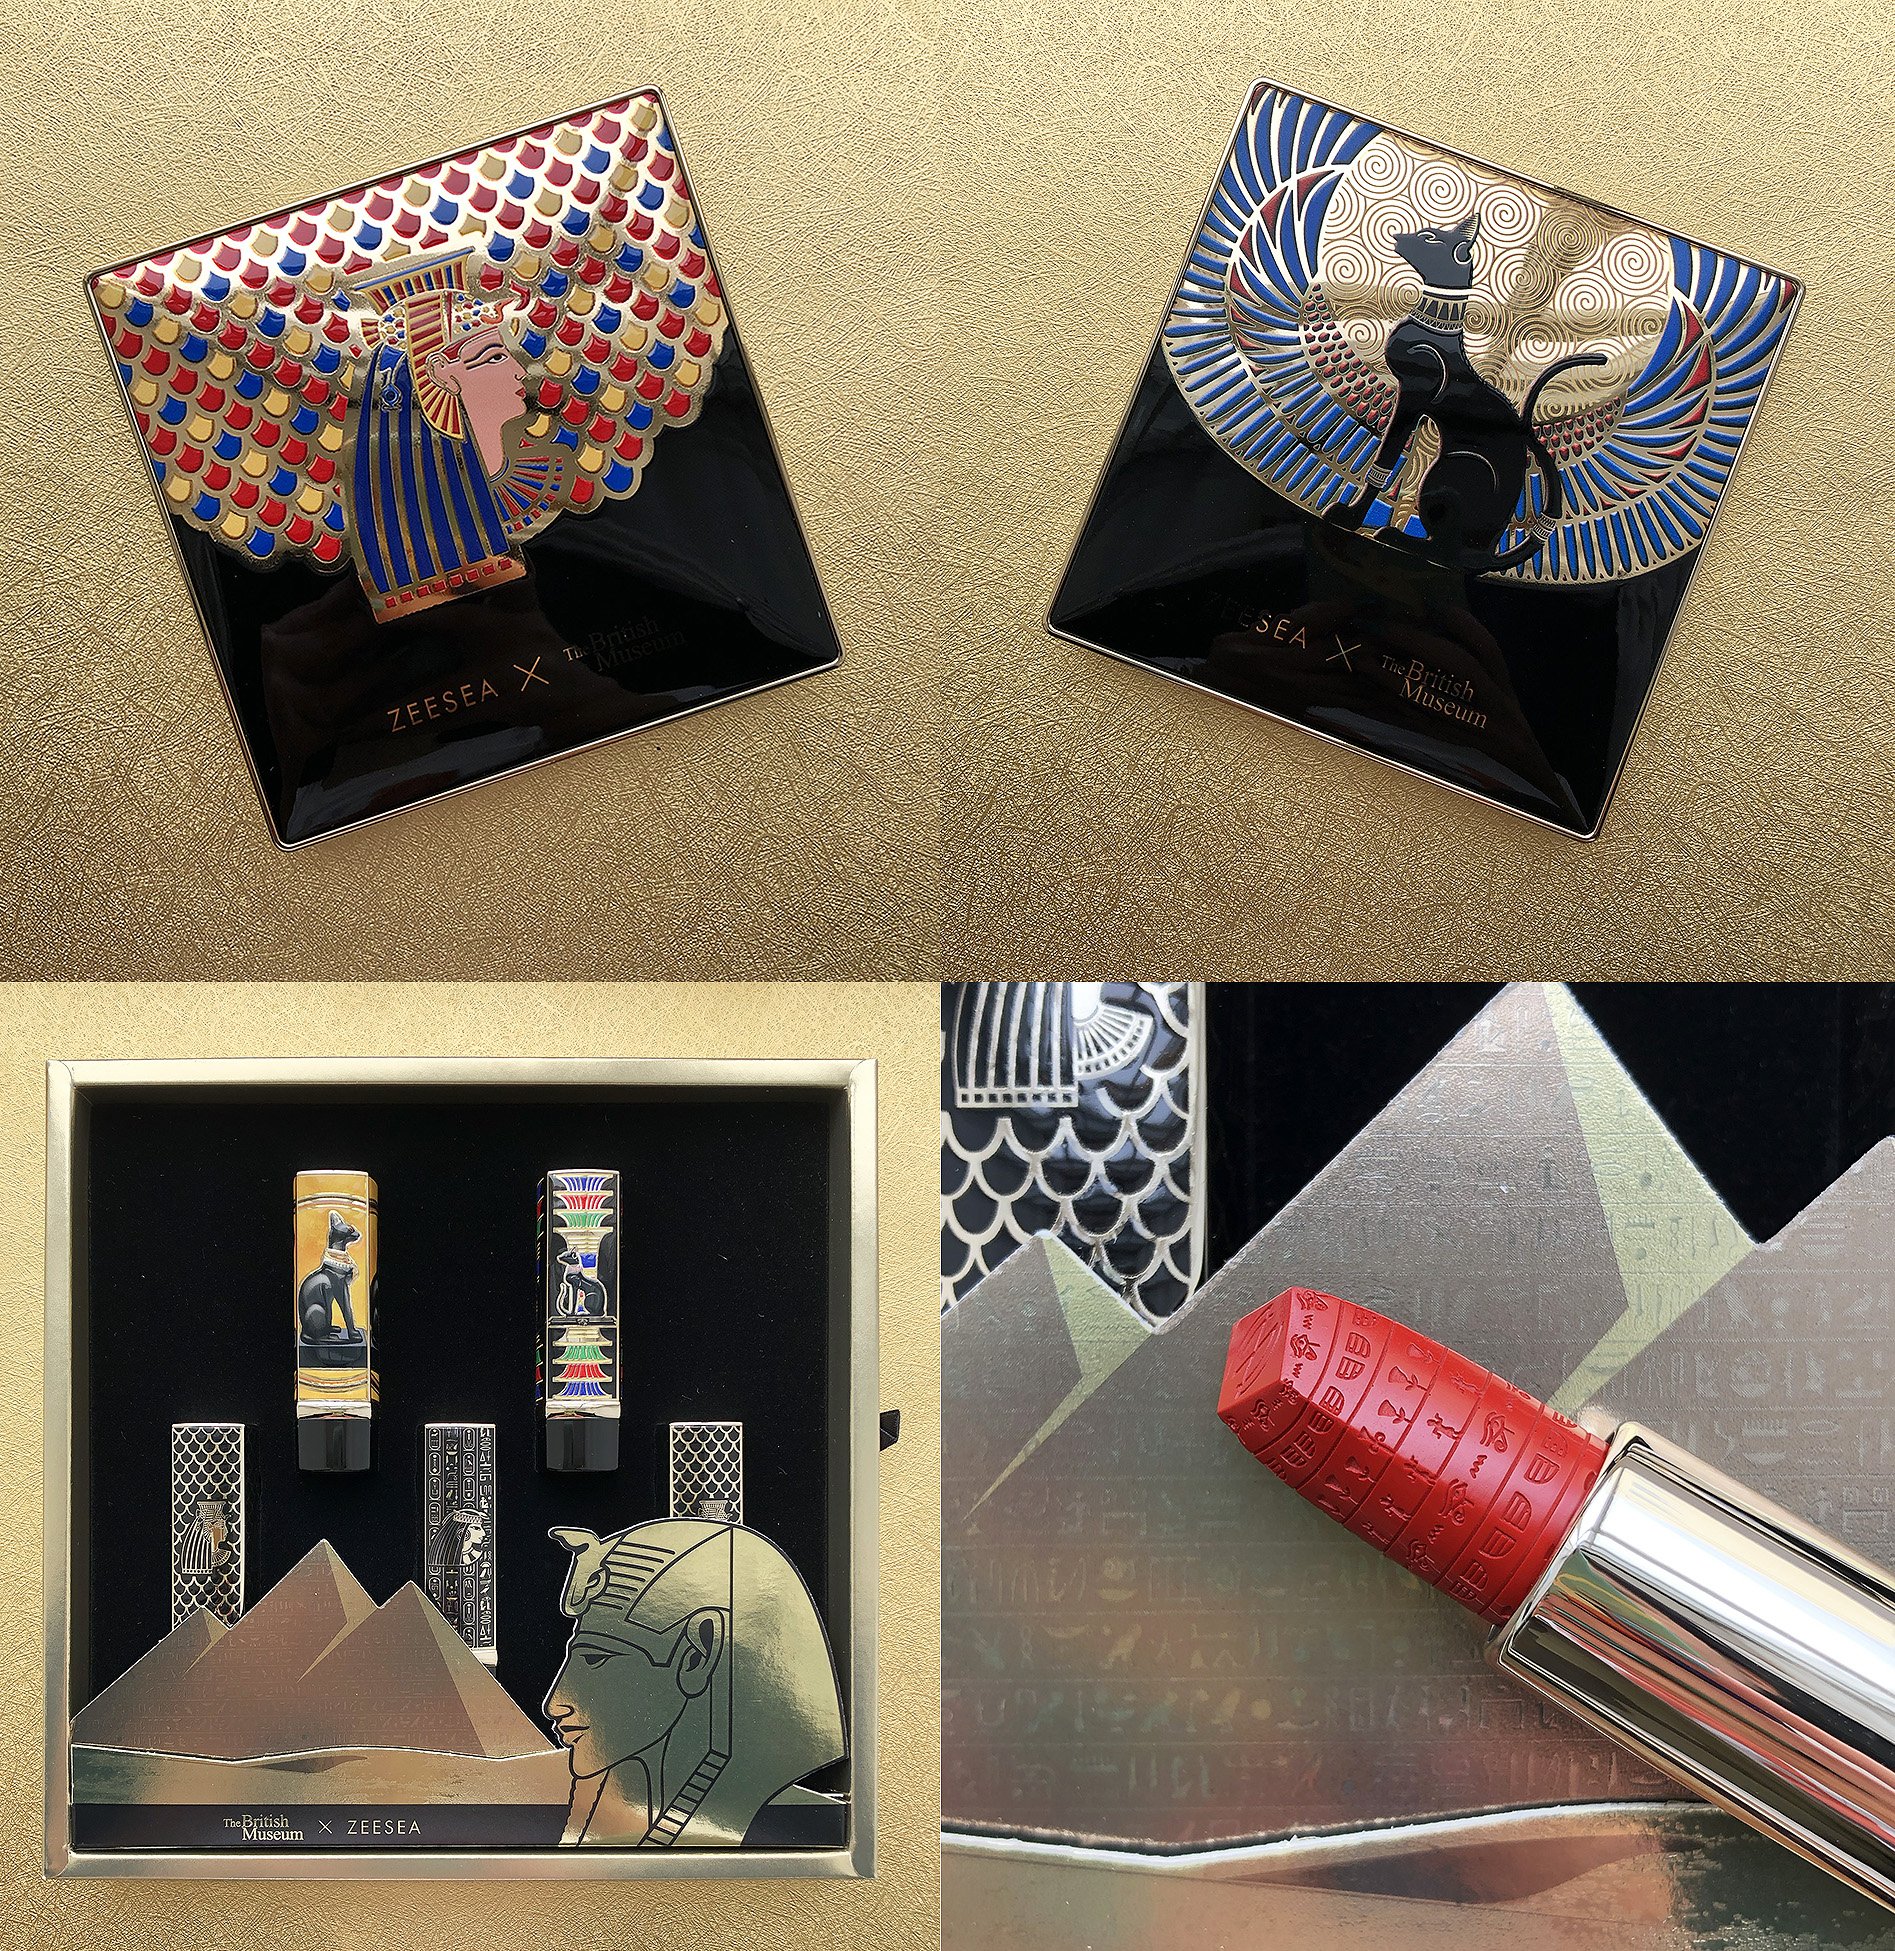   Eyeshadow Palettes and Lipstick Set Zeesea, 2019   In 2016 the British Museum began a partnership with Chinese licensing agent Alfilo Brands to sell a variety of merchandise inspired by the museum’s collections. By 2018 Alfilo had developed over 50